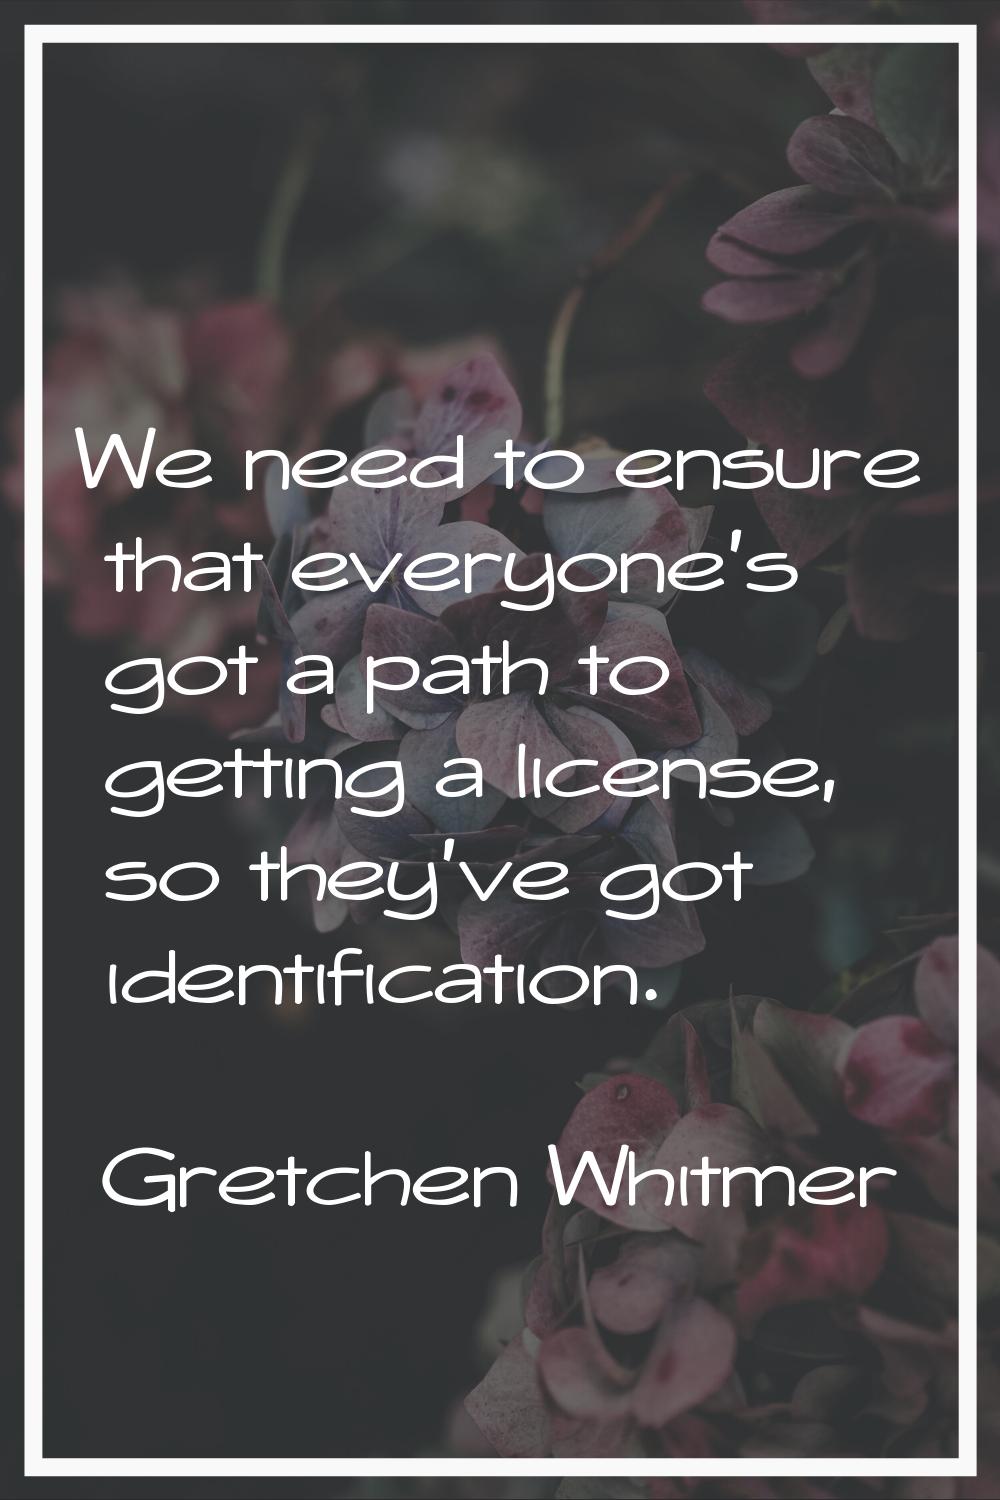 We need to ensure that everyone's got a path to getting a license, so they've got identification.